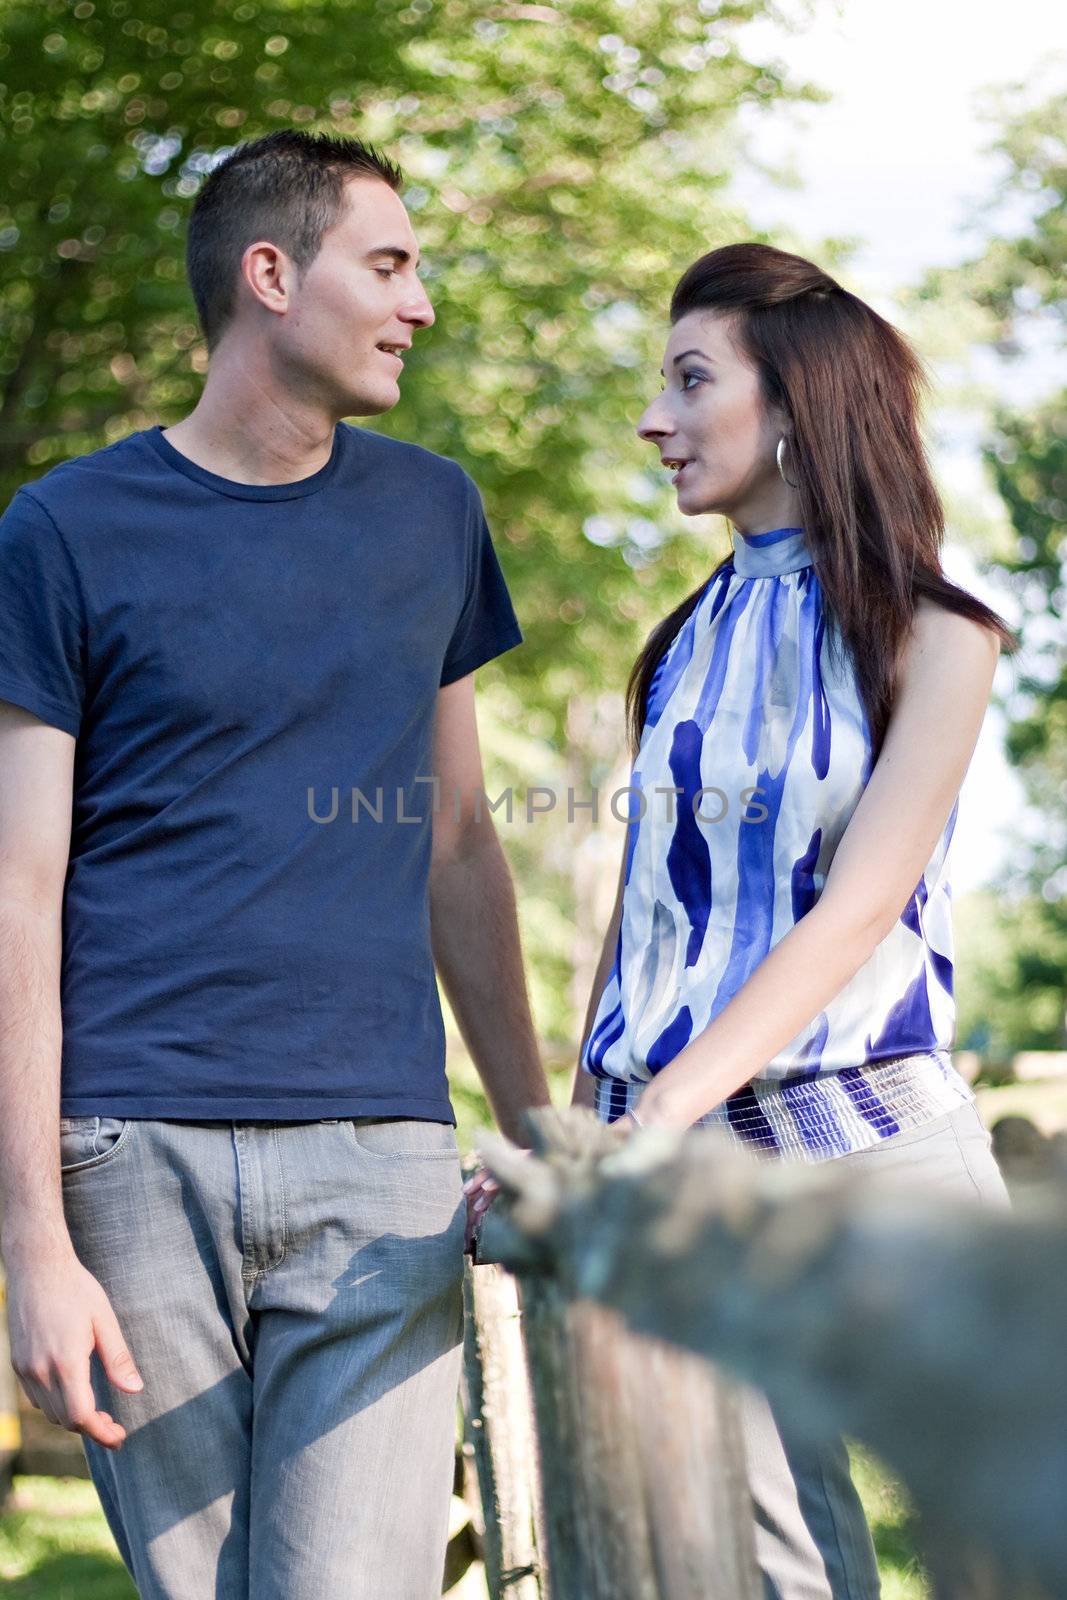 A happy young couple in their mid 20s talking to one another outdoors.